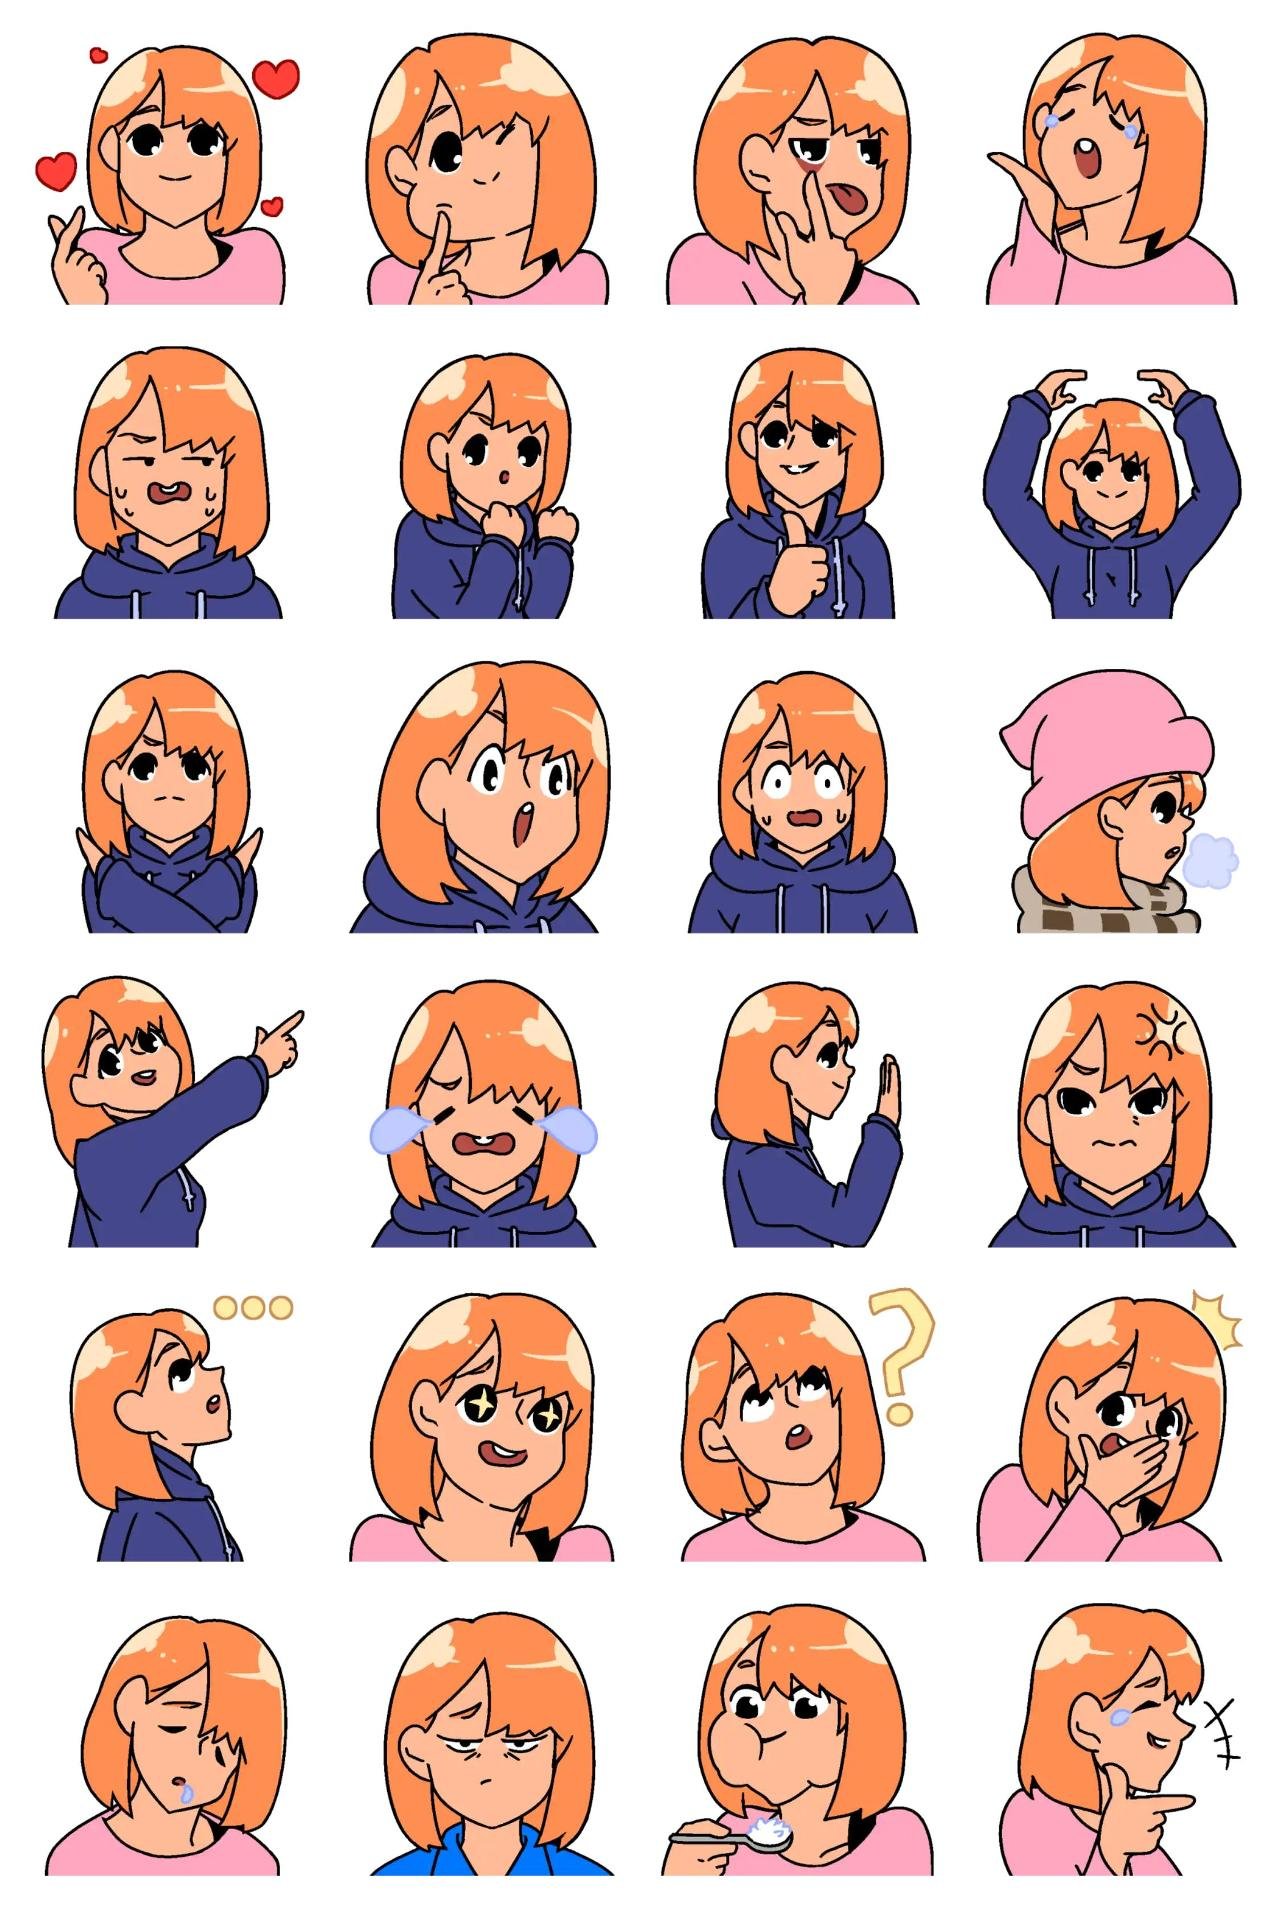 A girl's reactions Animation/Cartoon,People sticker pack for Whatsapp, Telegram, Signal, and others chatting and message apps